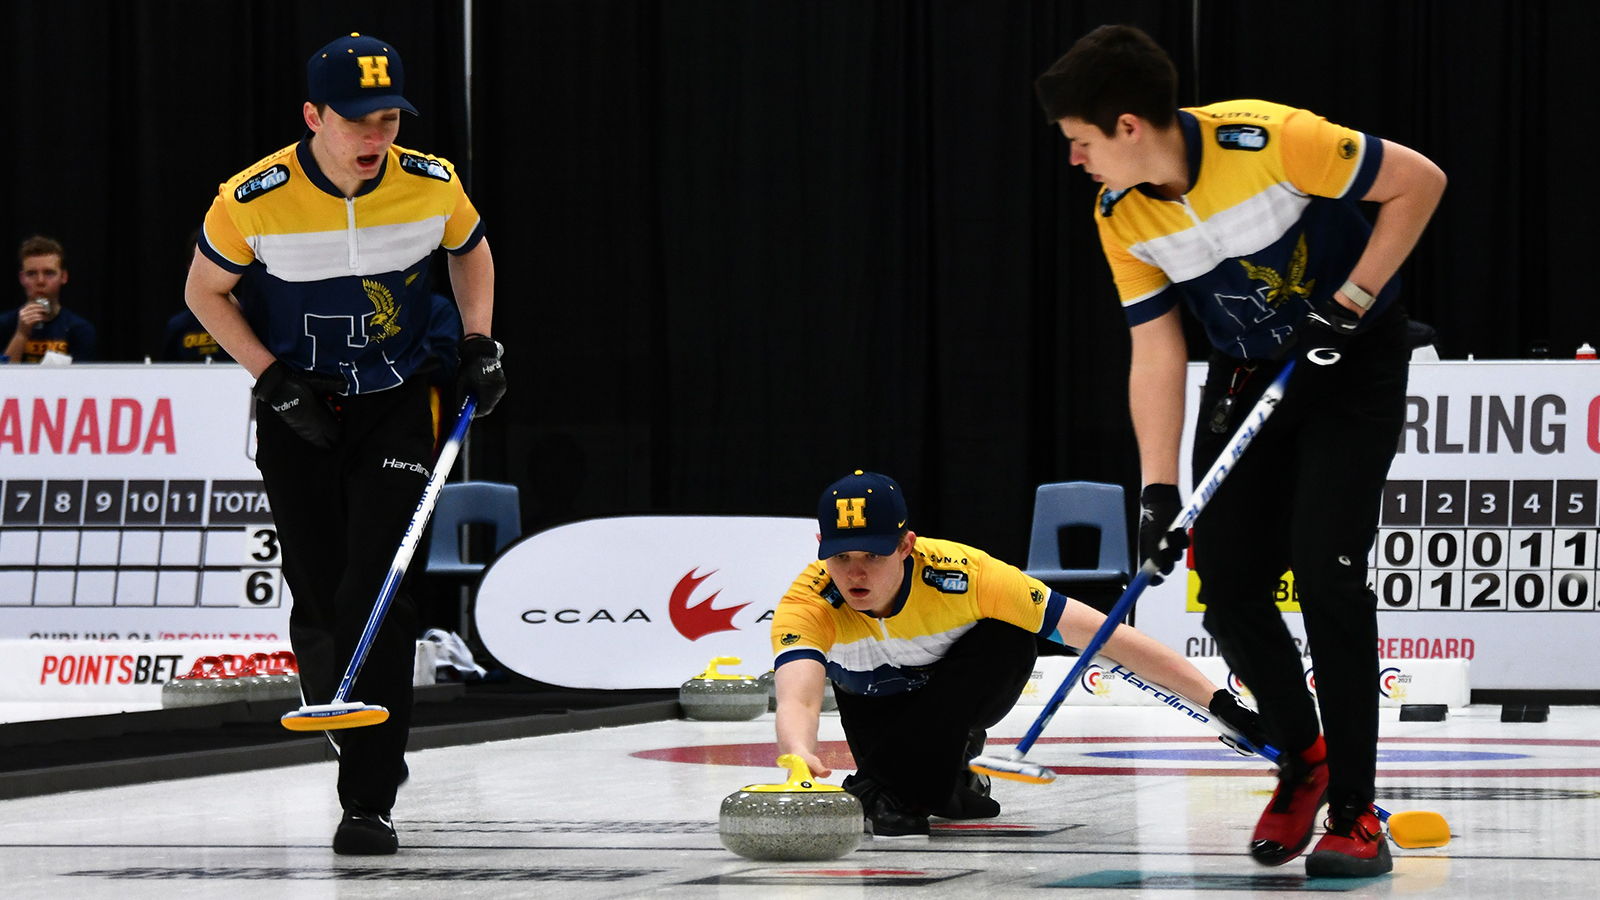 2024 CCAA Curling Canada Championships begin Tuesday in Fredericton